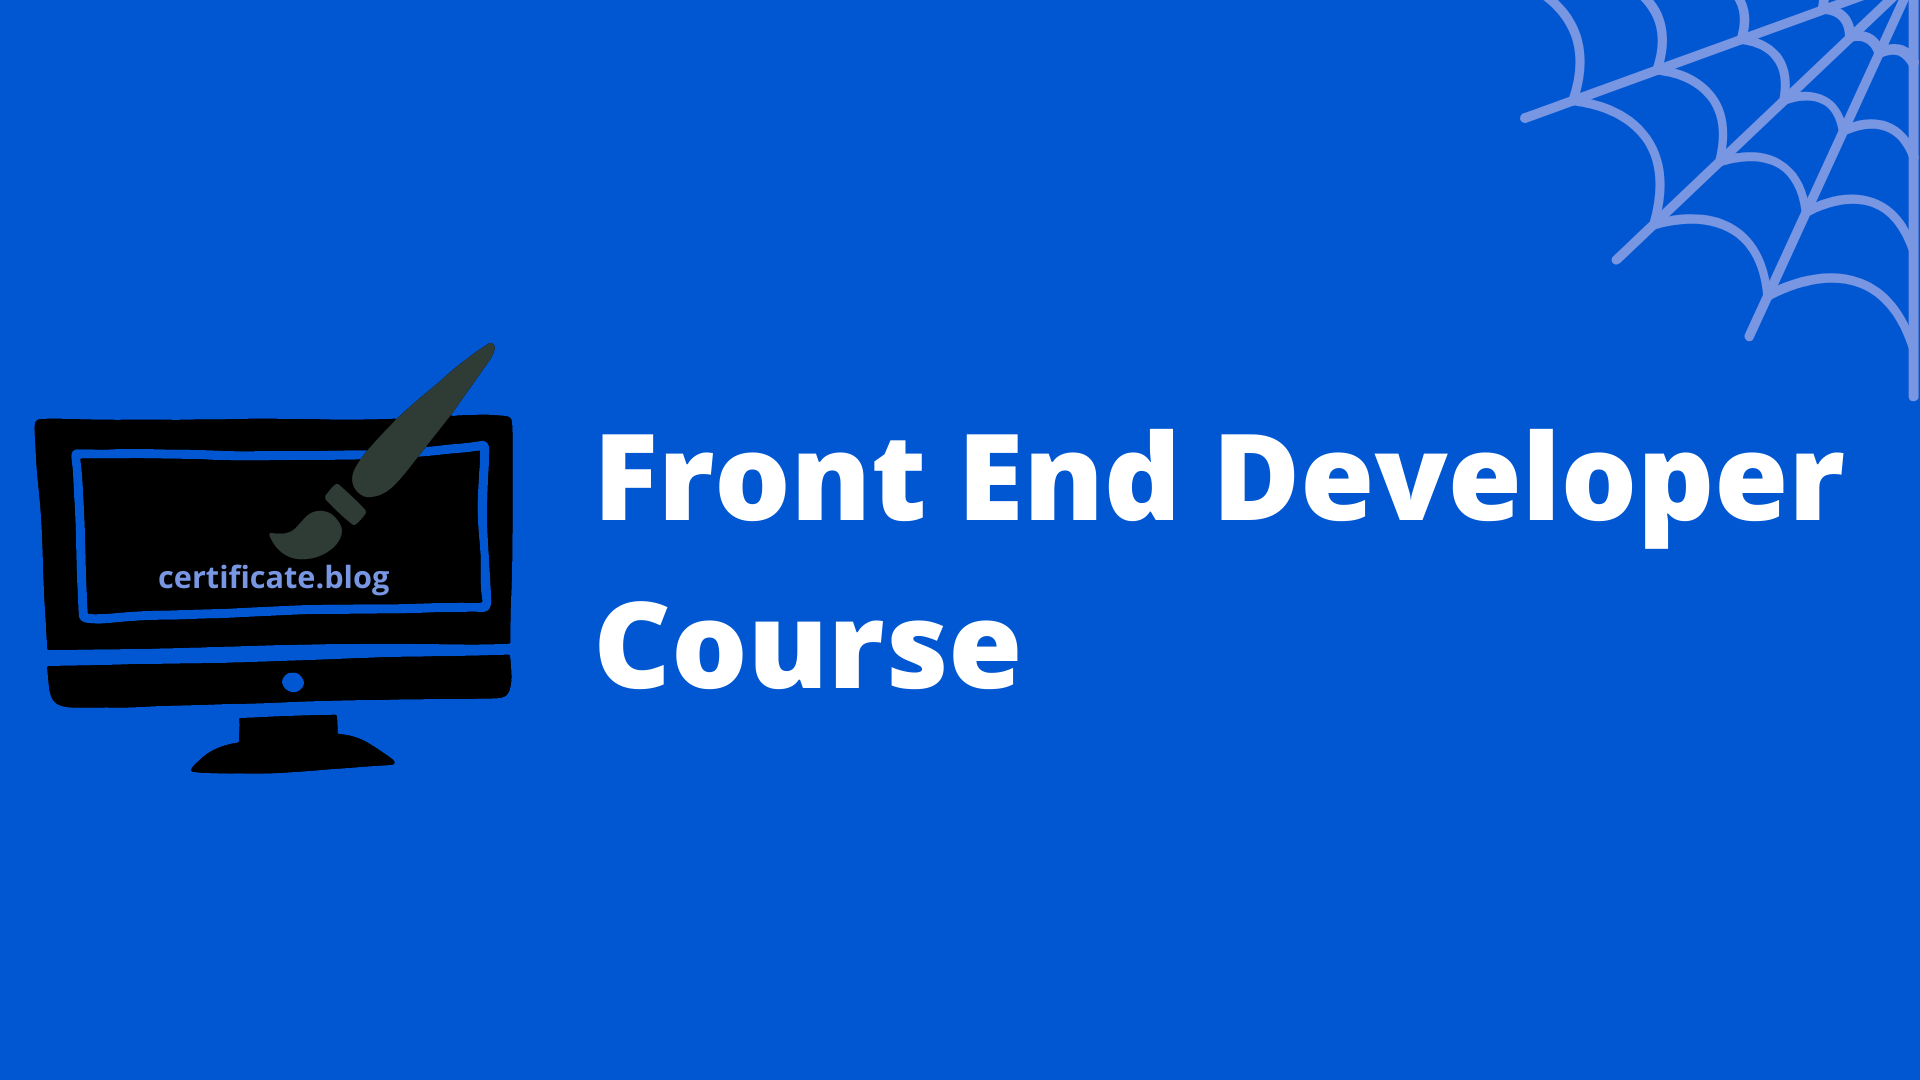 Best front end developer course in 2021